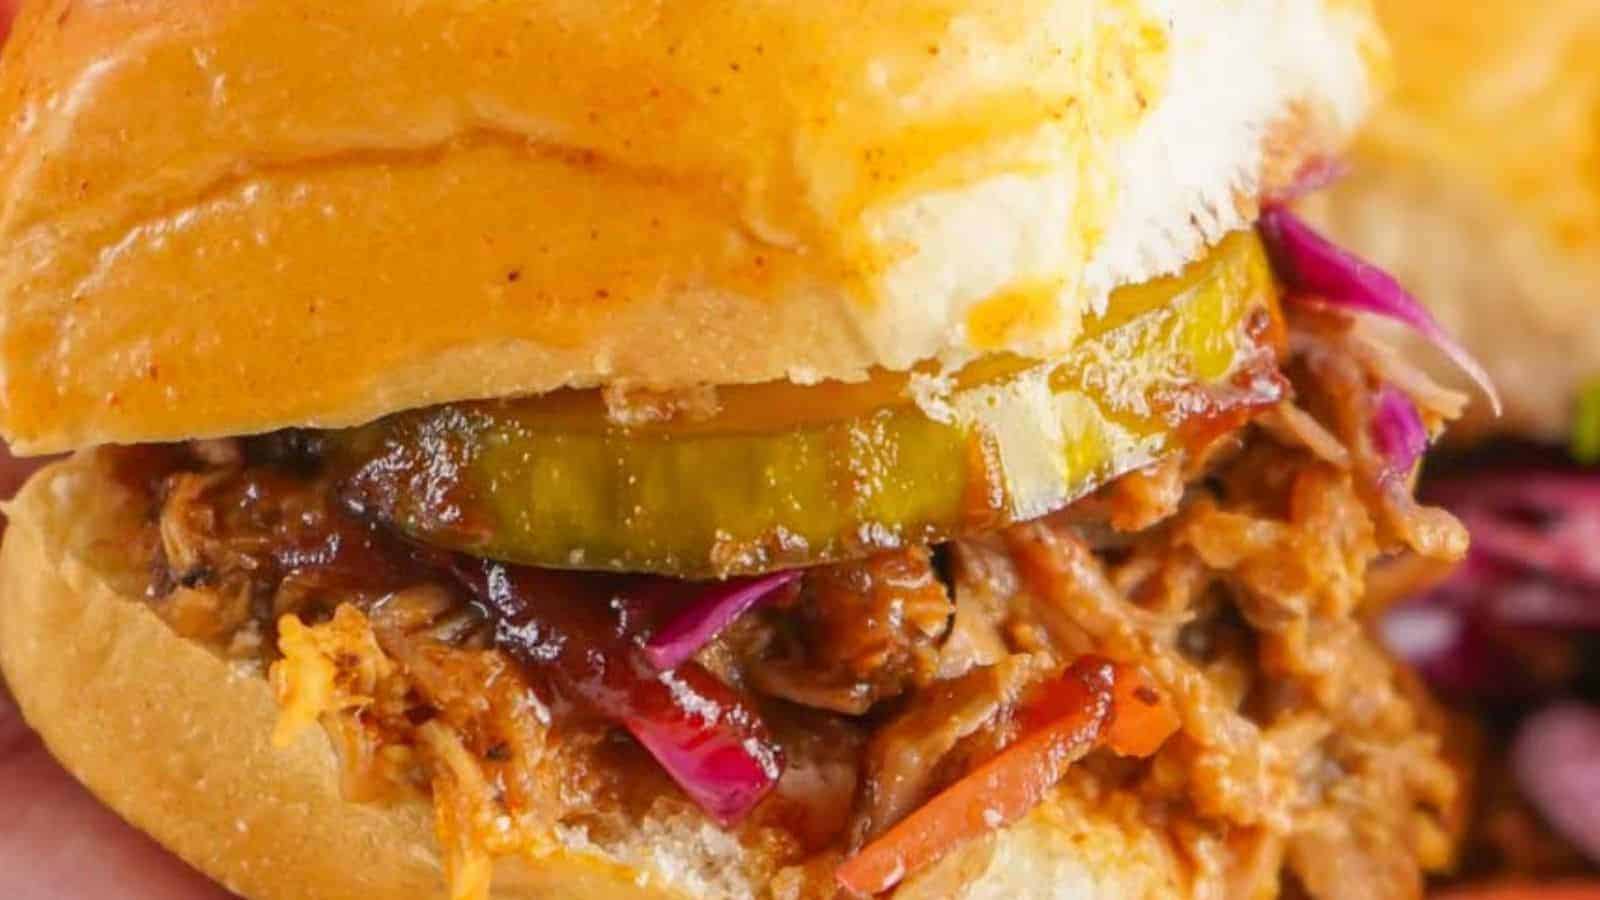 Close-up of a pulled pork sandwich with pickles and red cabbage on a bun, held in hand, with chips in the background.